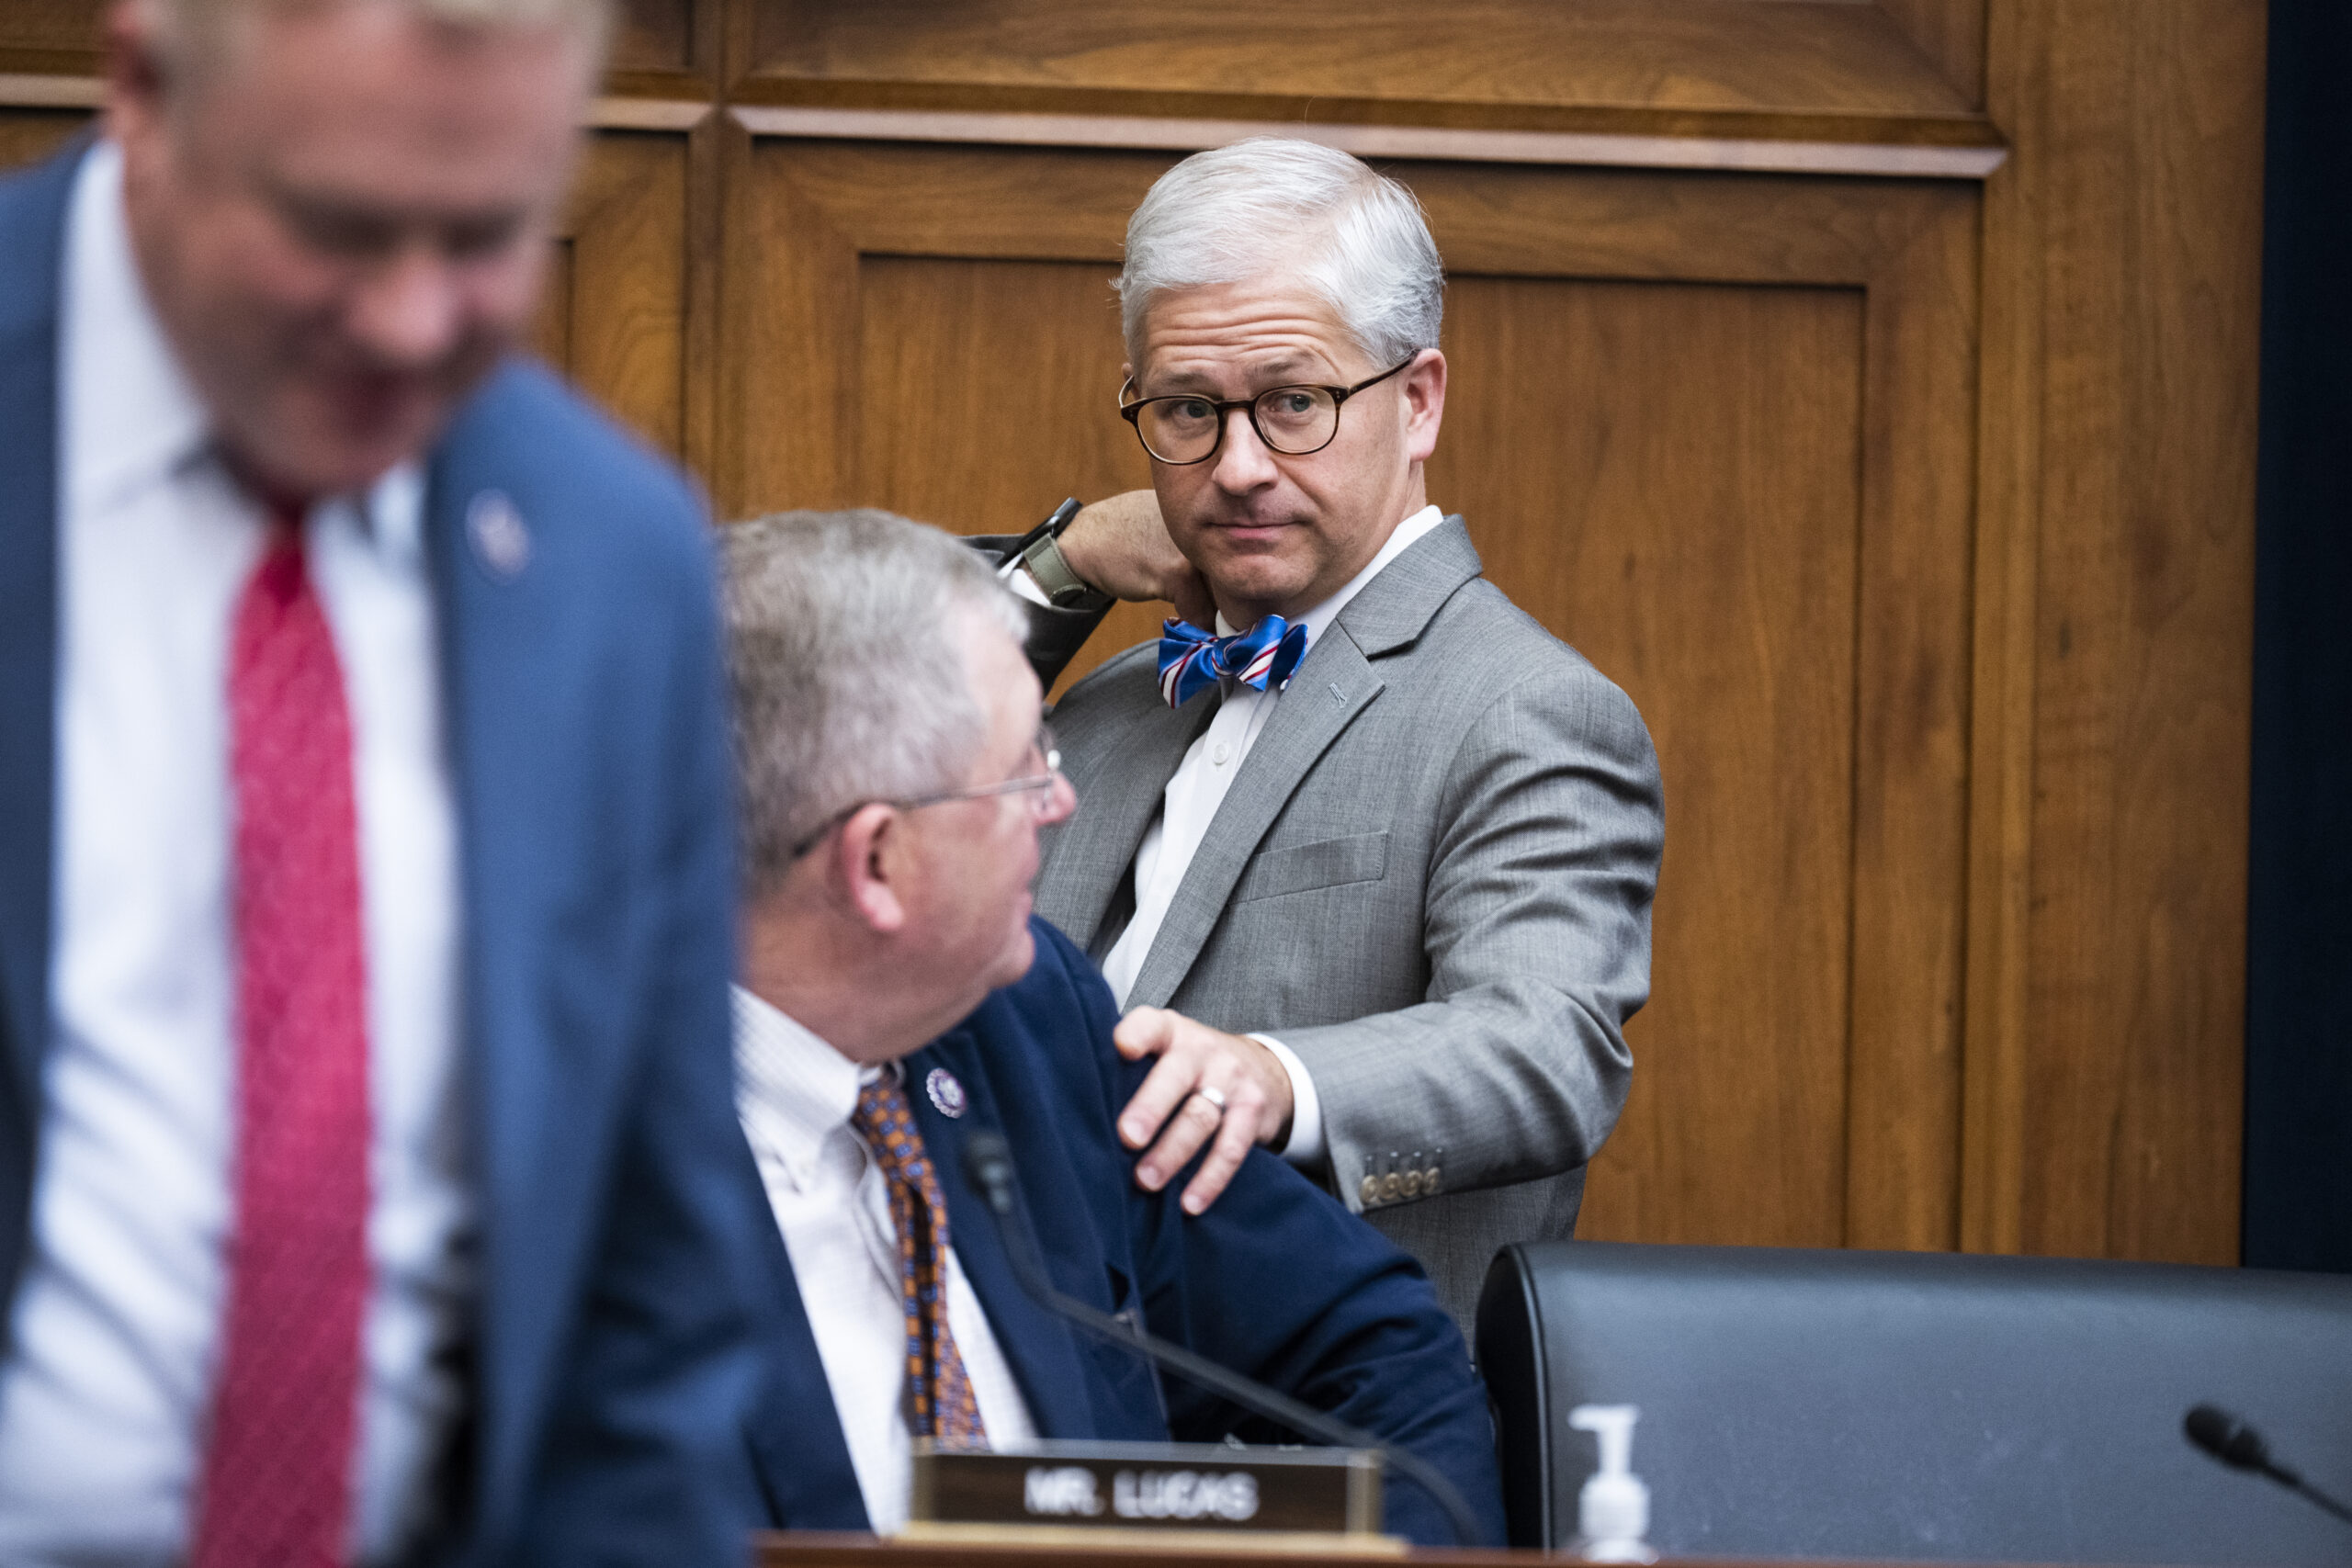 Ranking member Rep. Patrick McHenry, R-N.C., right, greets a fellow representative, on Dec. 13, 2022. McHenry is expected to head the Committee on Financial Services in the next Congress. Credit: Tom Williams/CQ-Roll Call, Inc via Getty Images